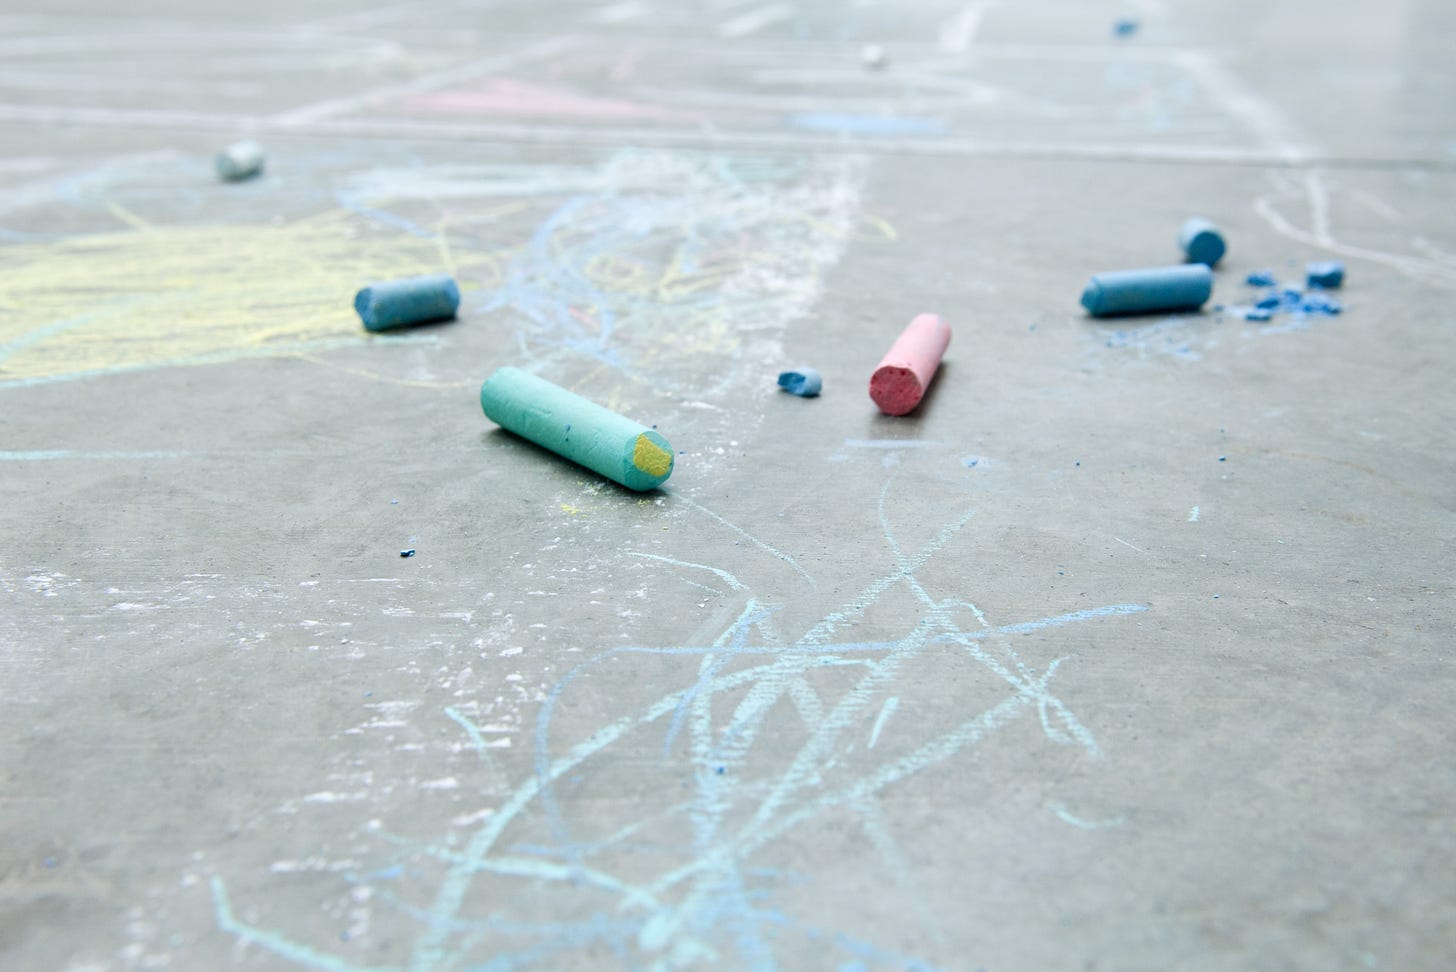 Multicolored sidewalk chalk scattered on an asphalt surface with some scribbles